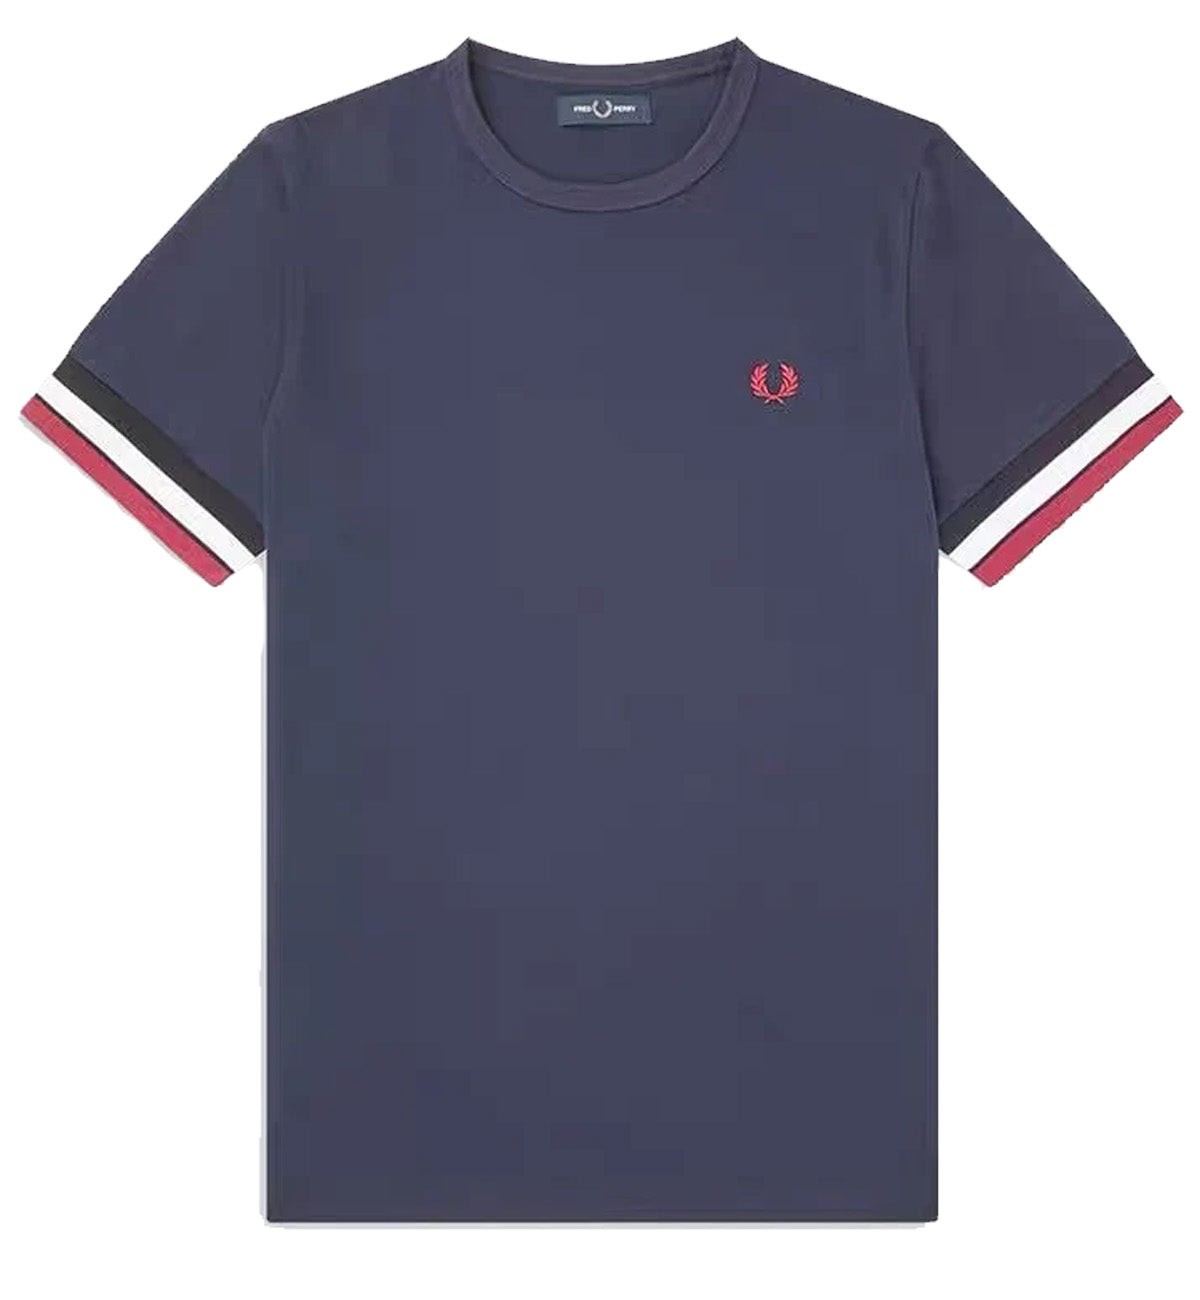 Fred Perry Navy Shirt with White Red Stripe T-Shirt